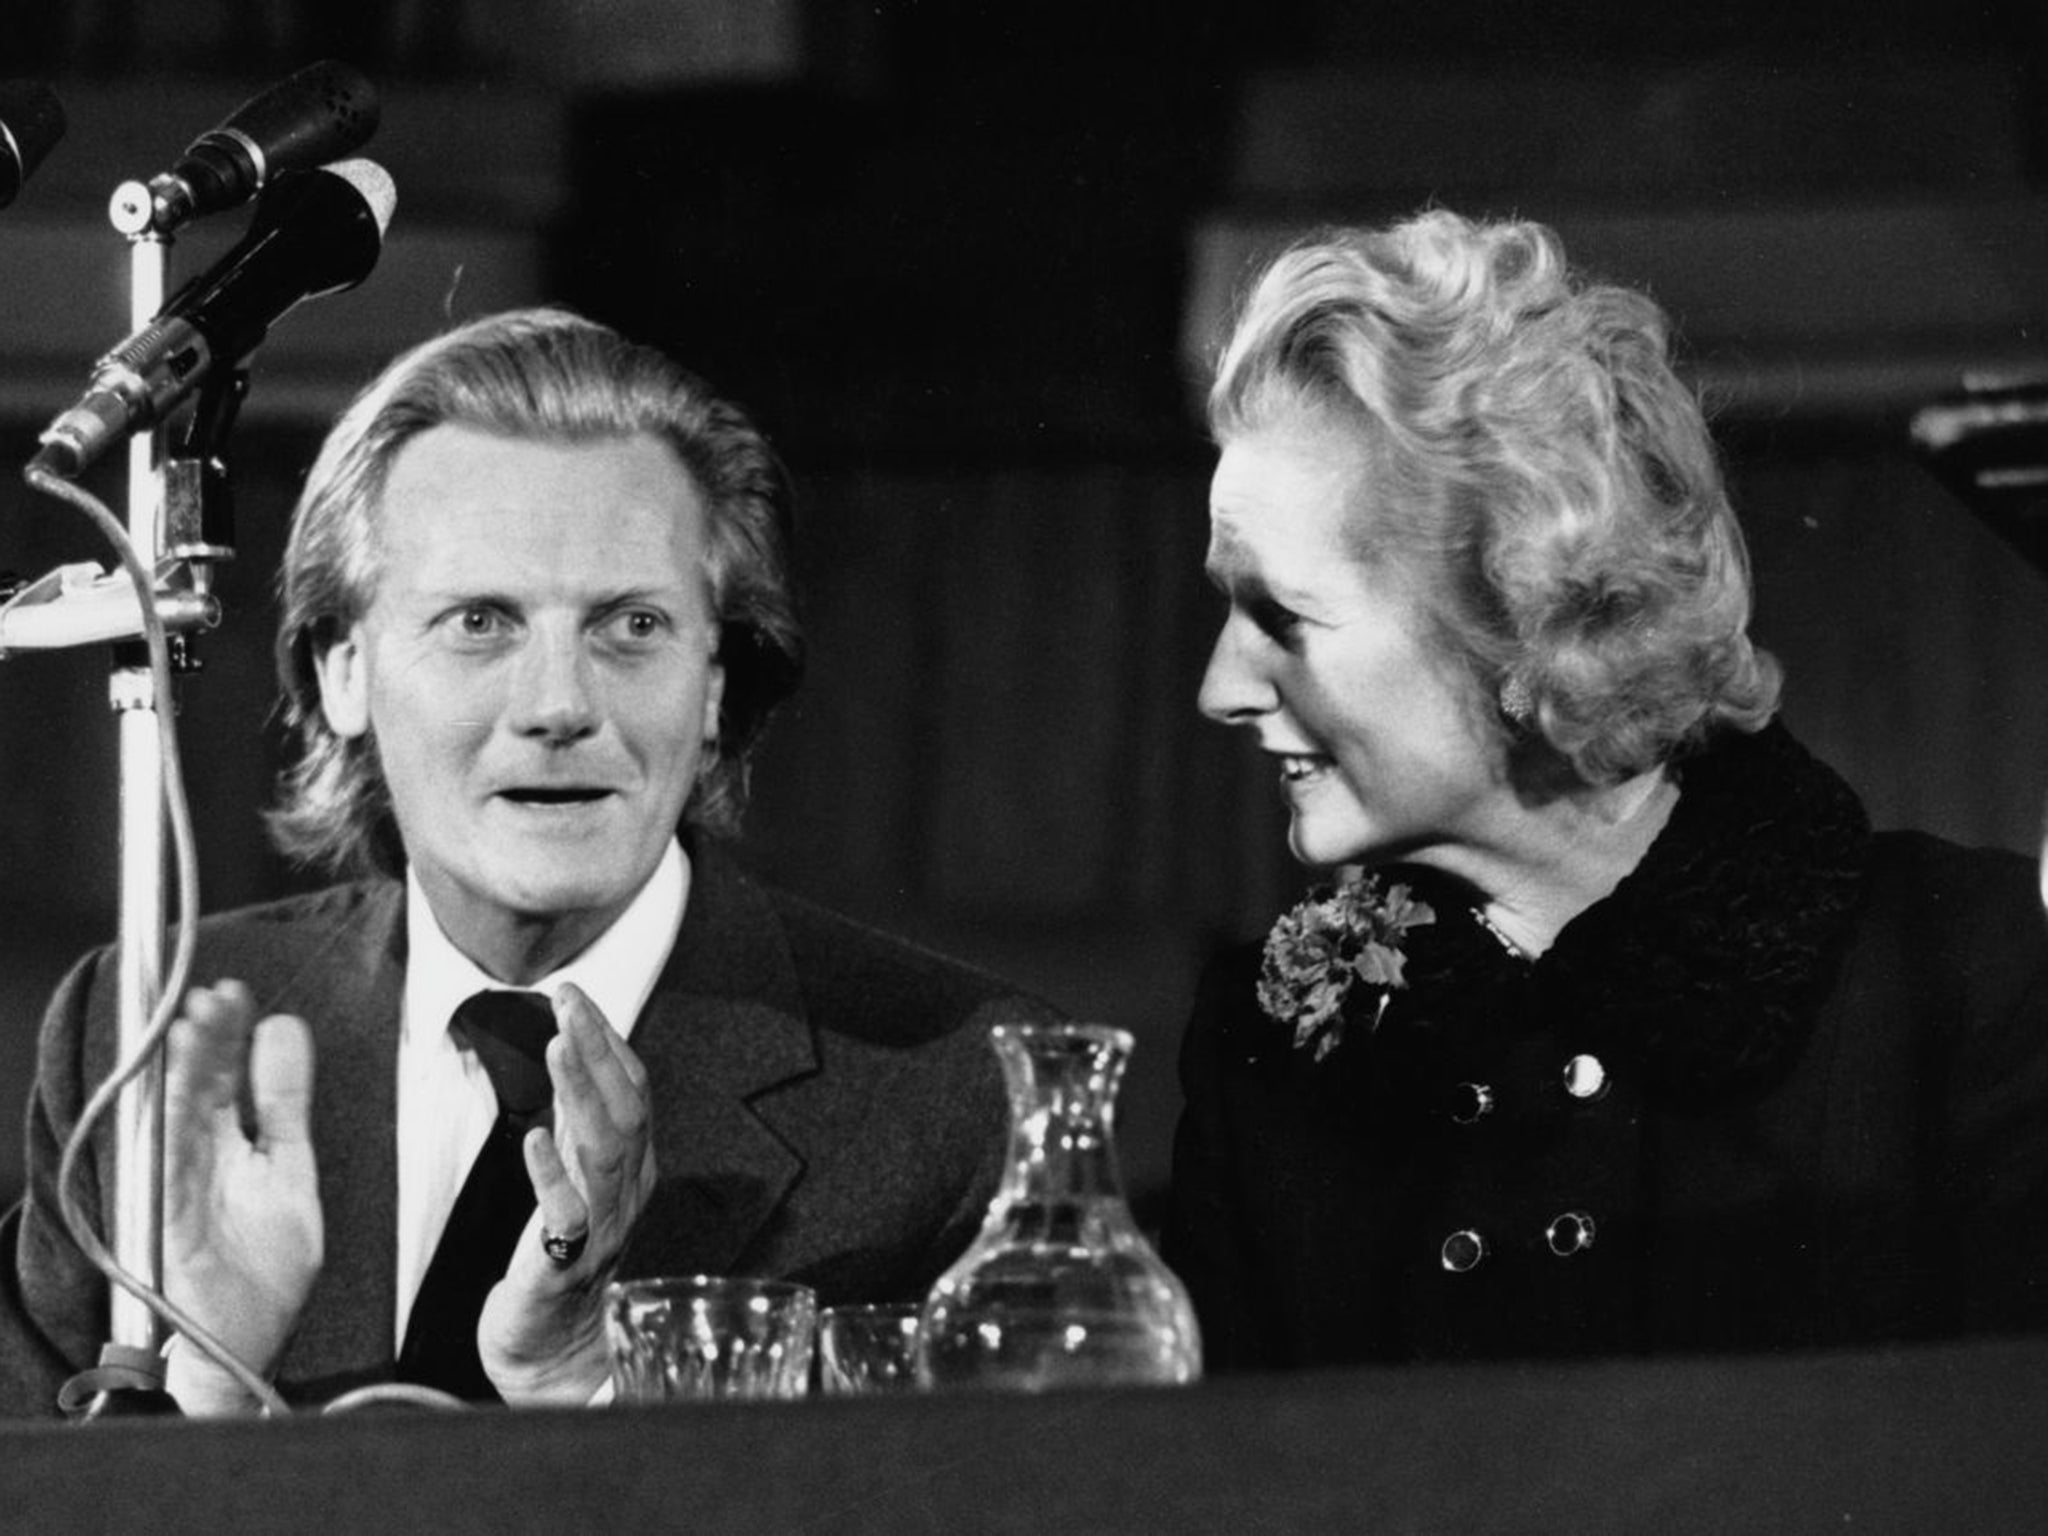 Margaret Thatcher and Michael Heseltine, pictured in 1975, were allies whose relationship turned sour after the Tories came to power in 1979